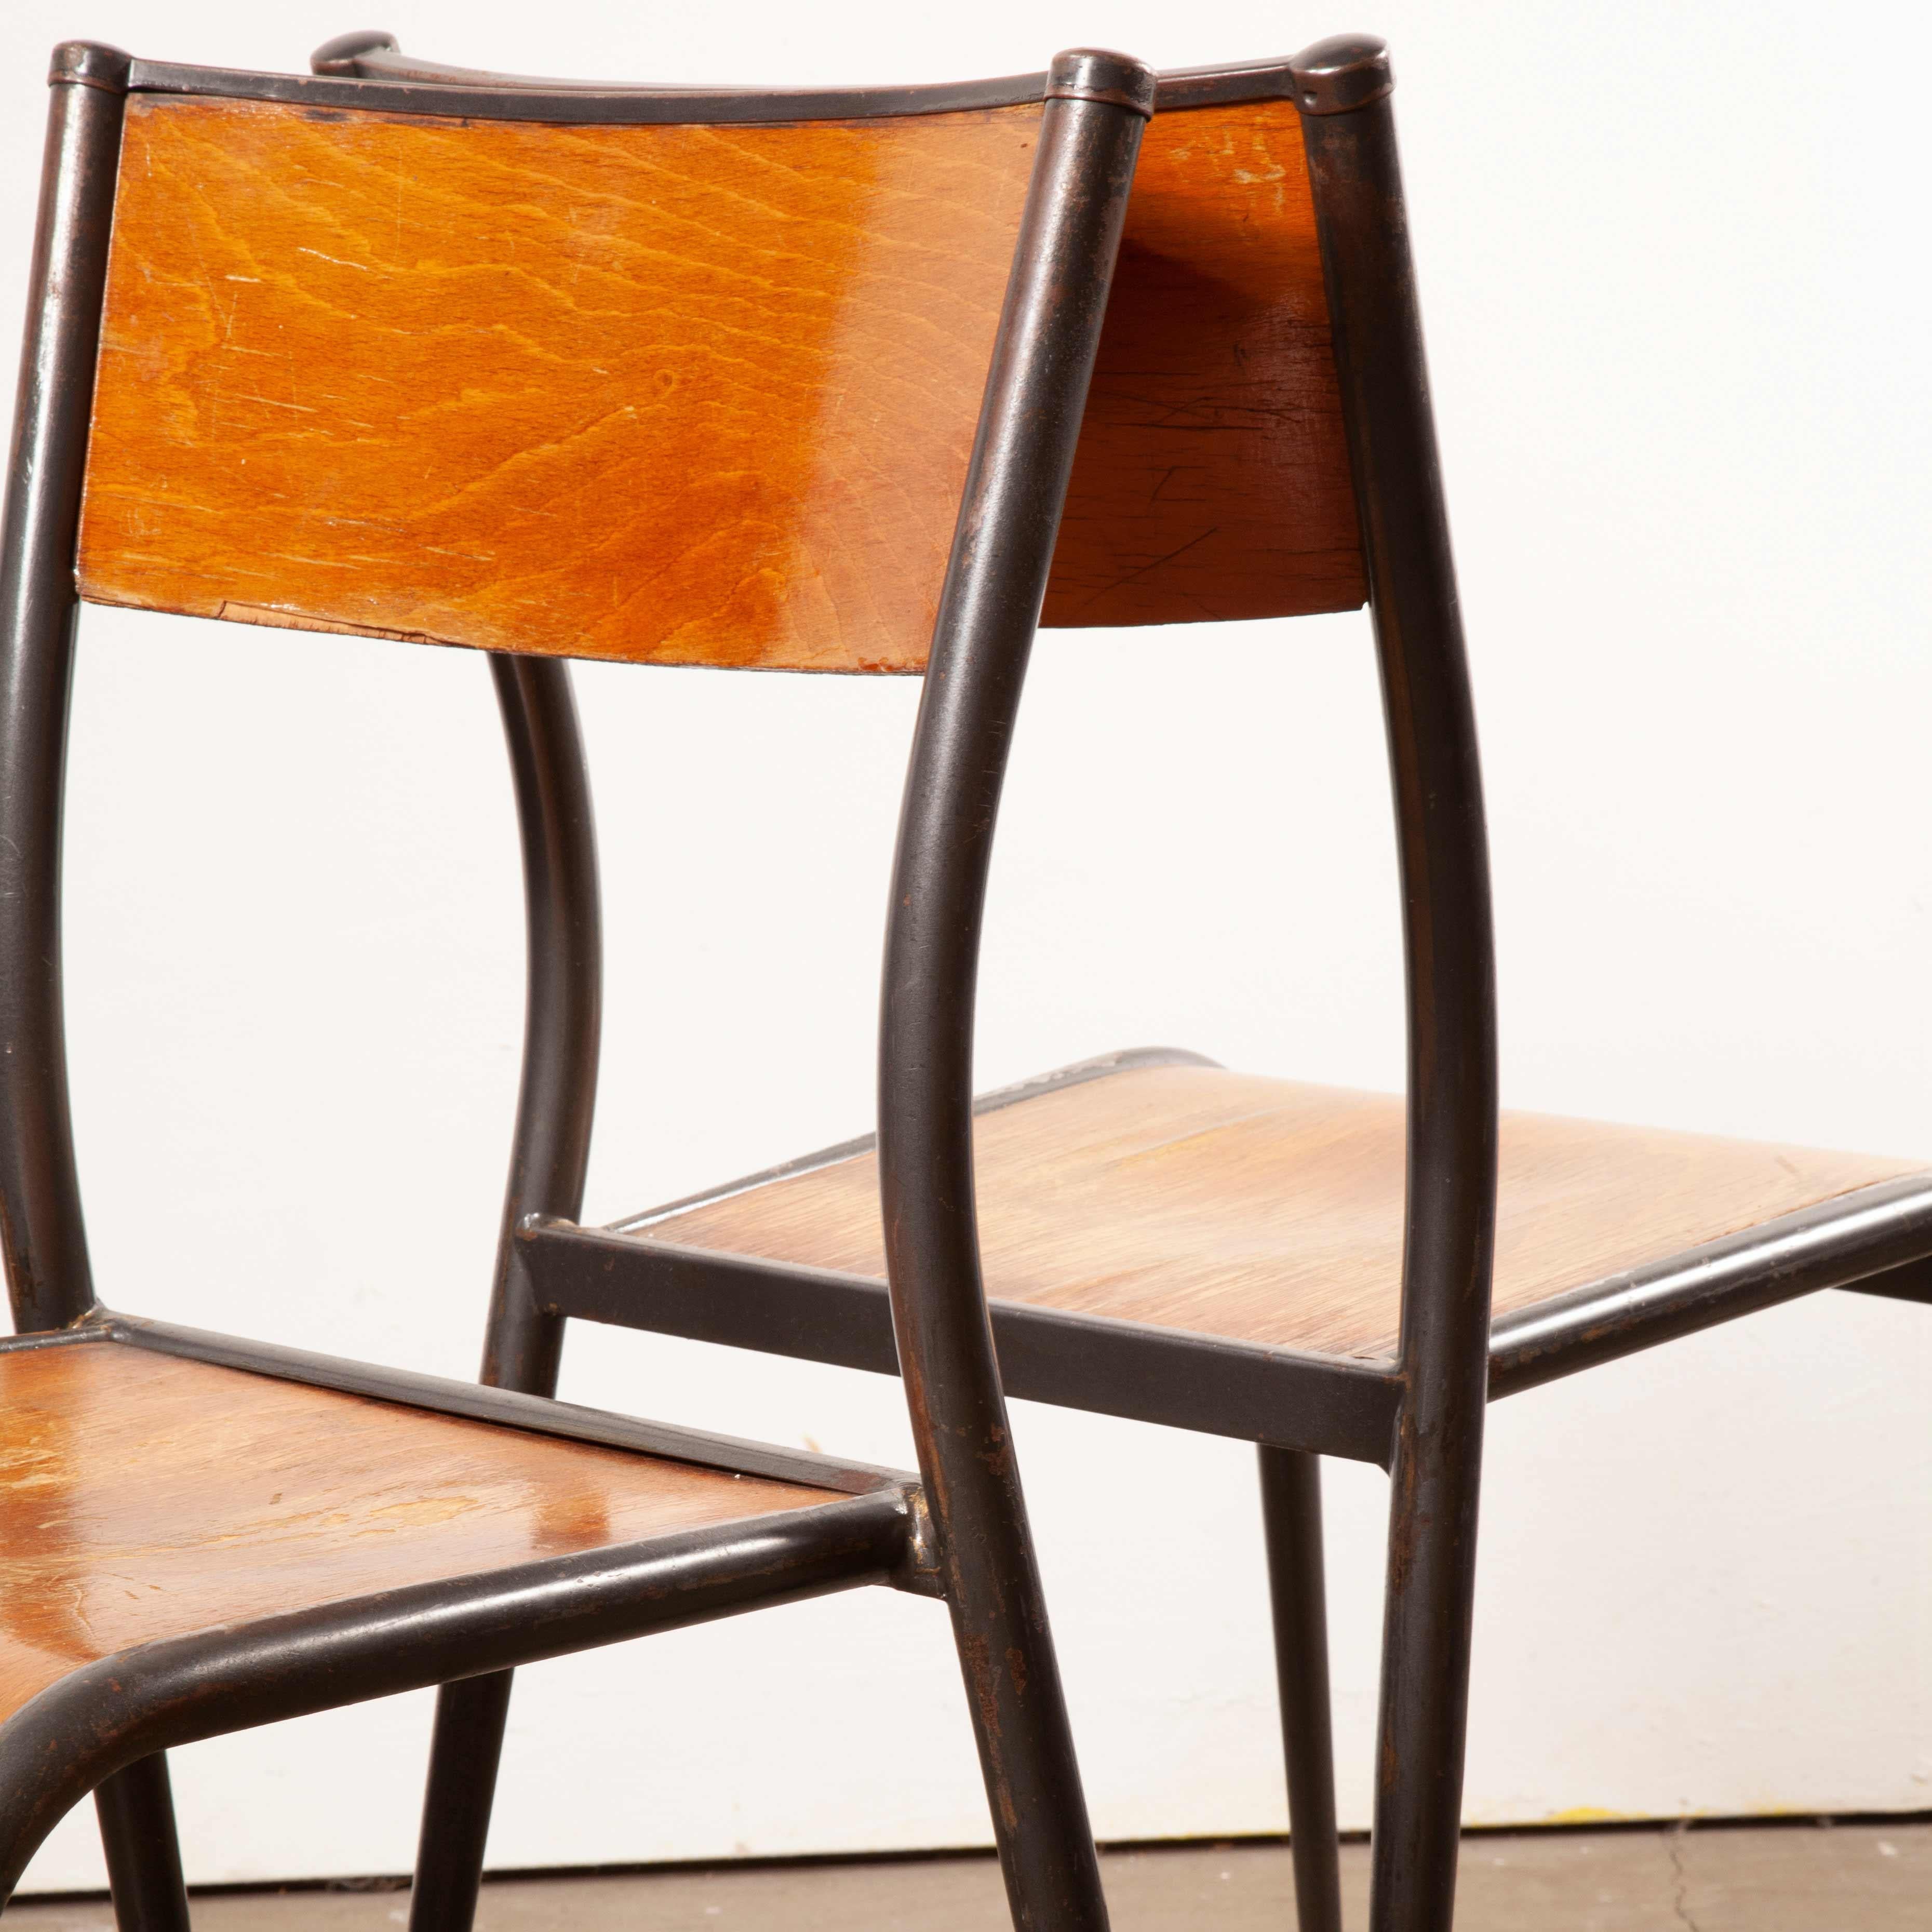 1950s French Mullca vintage stacking school/dining chairs, set of two. One of our most favourite chairs, in 1947 Robert Muller and Gaston Cavaillon created the company that went on to develop arguably the most famous French school chair, and these